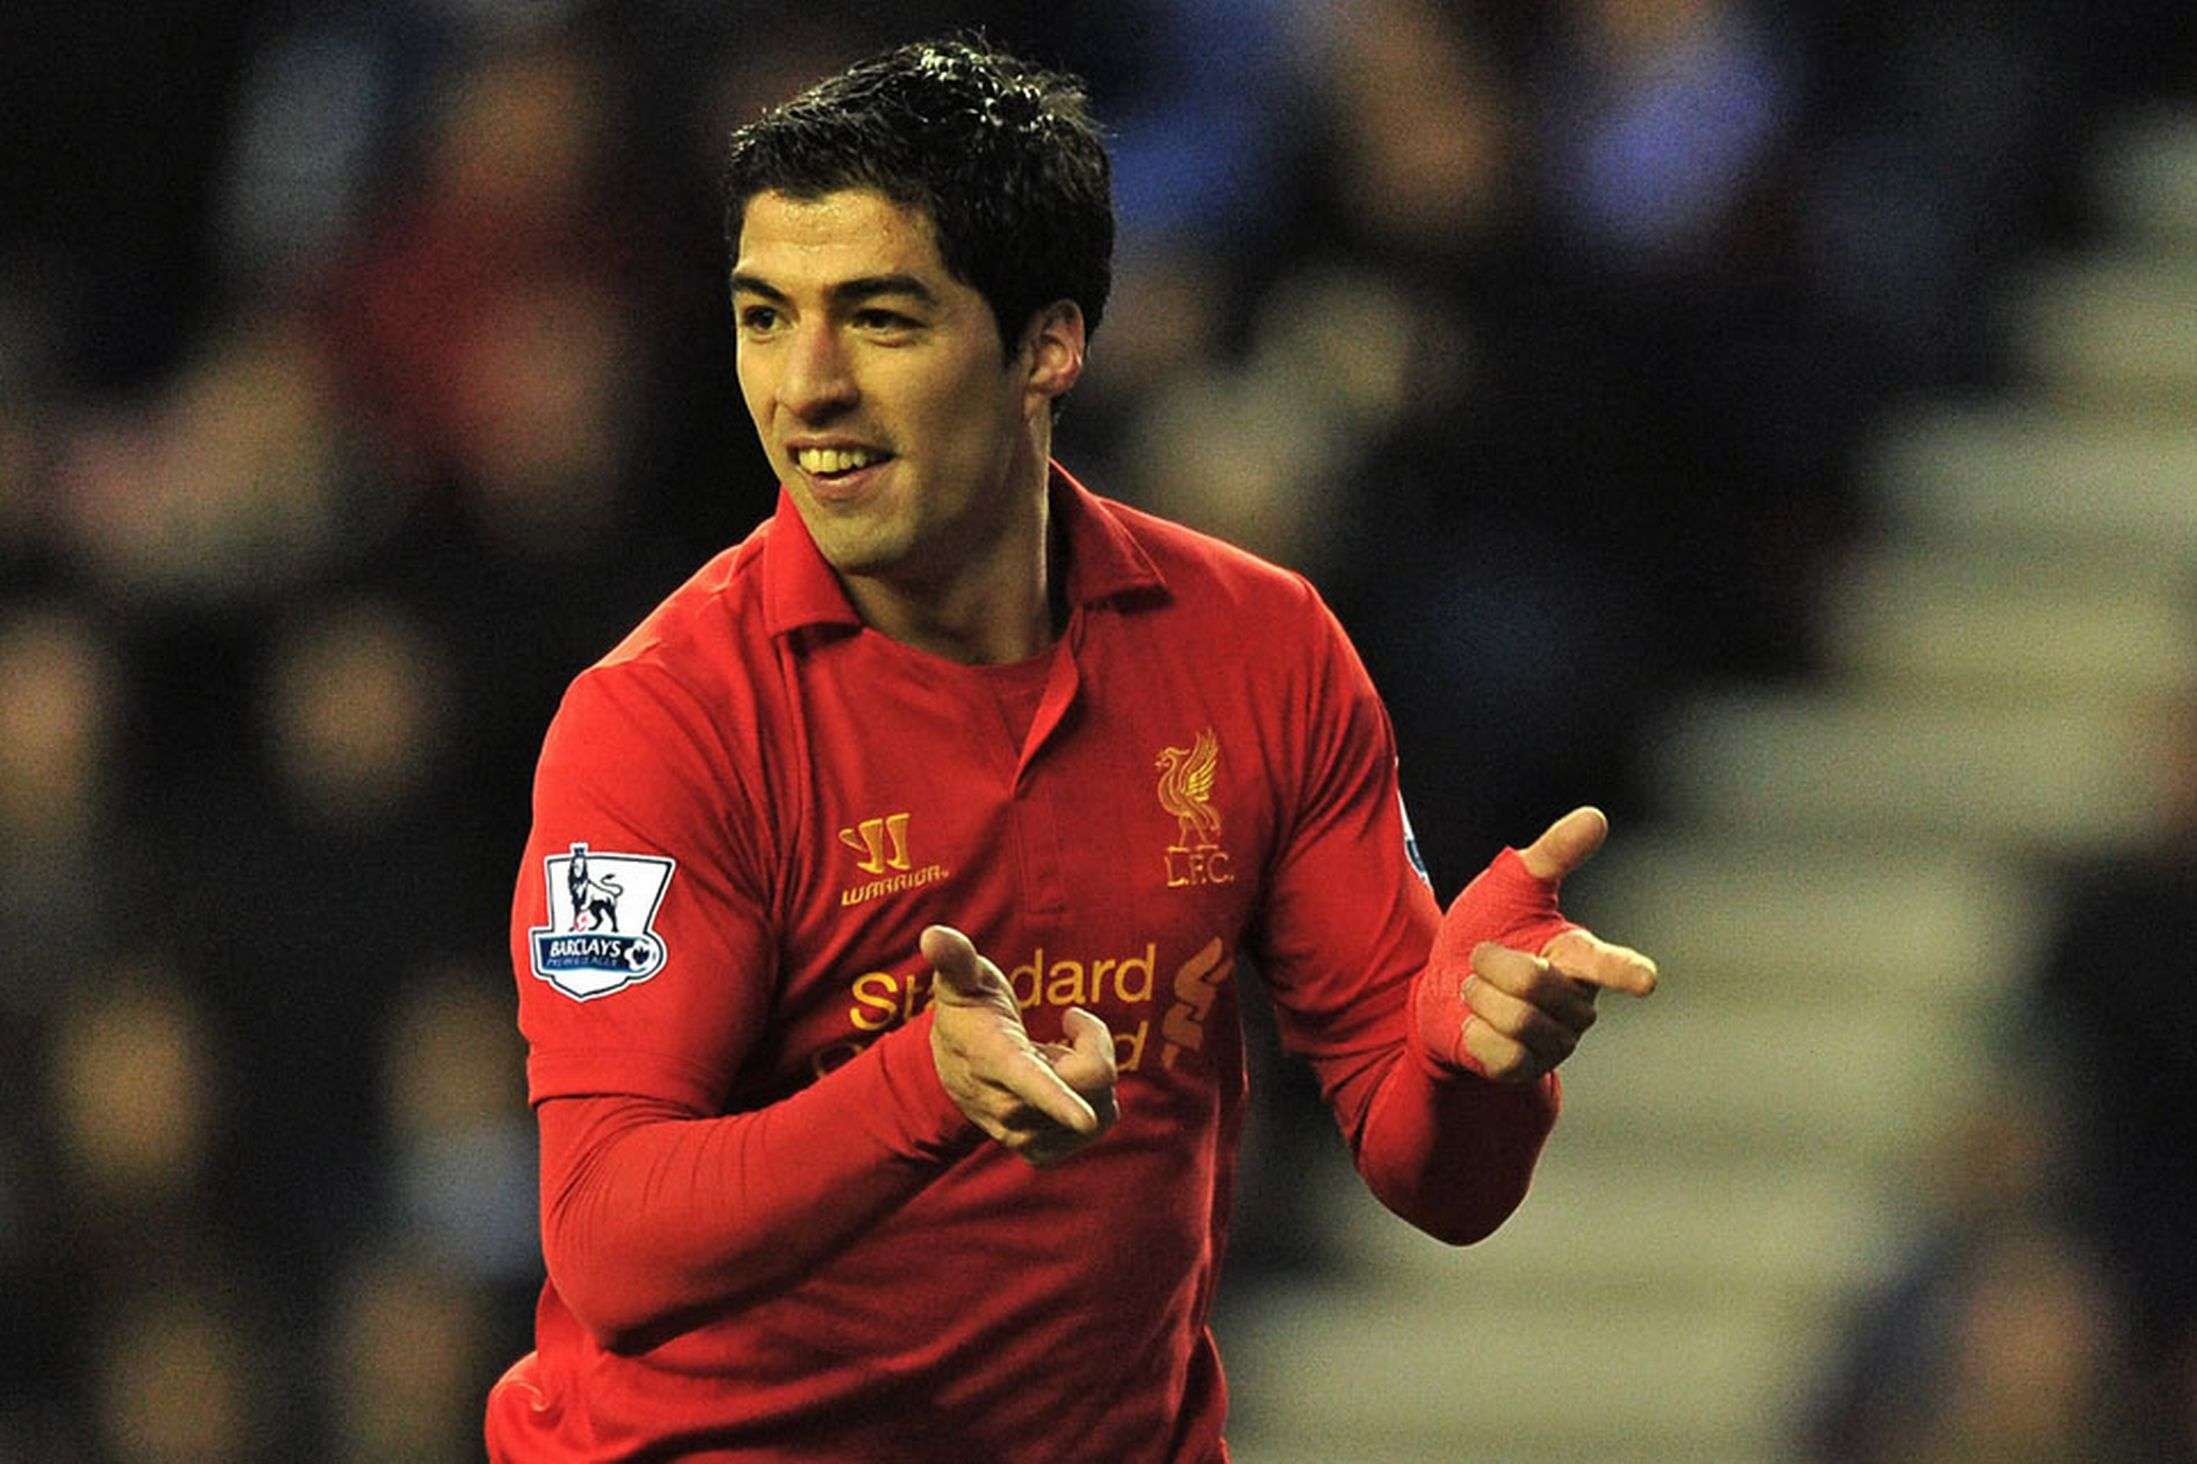 Luis Suarez spotted the next 'Steven Gerrard' with Liverpool now keen.